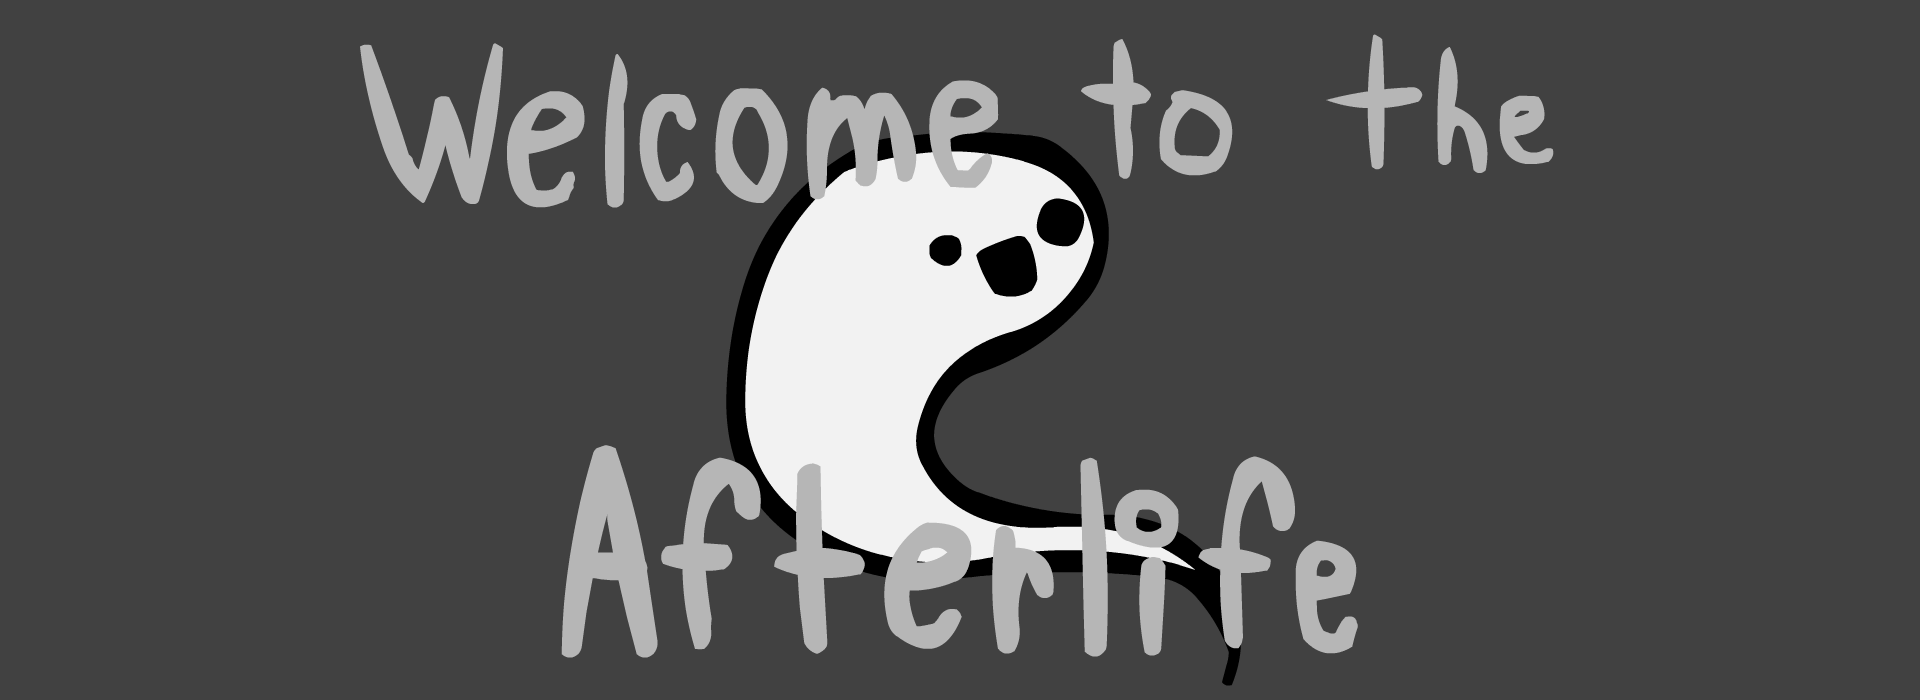 Welcome to the Afterlife